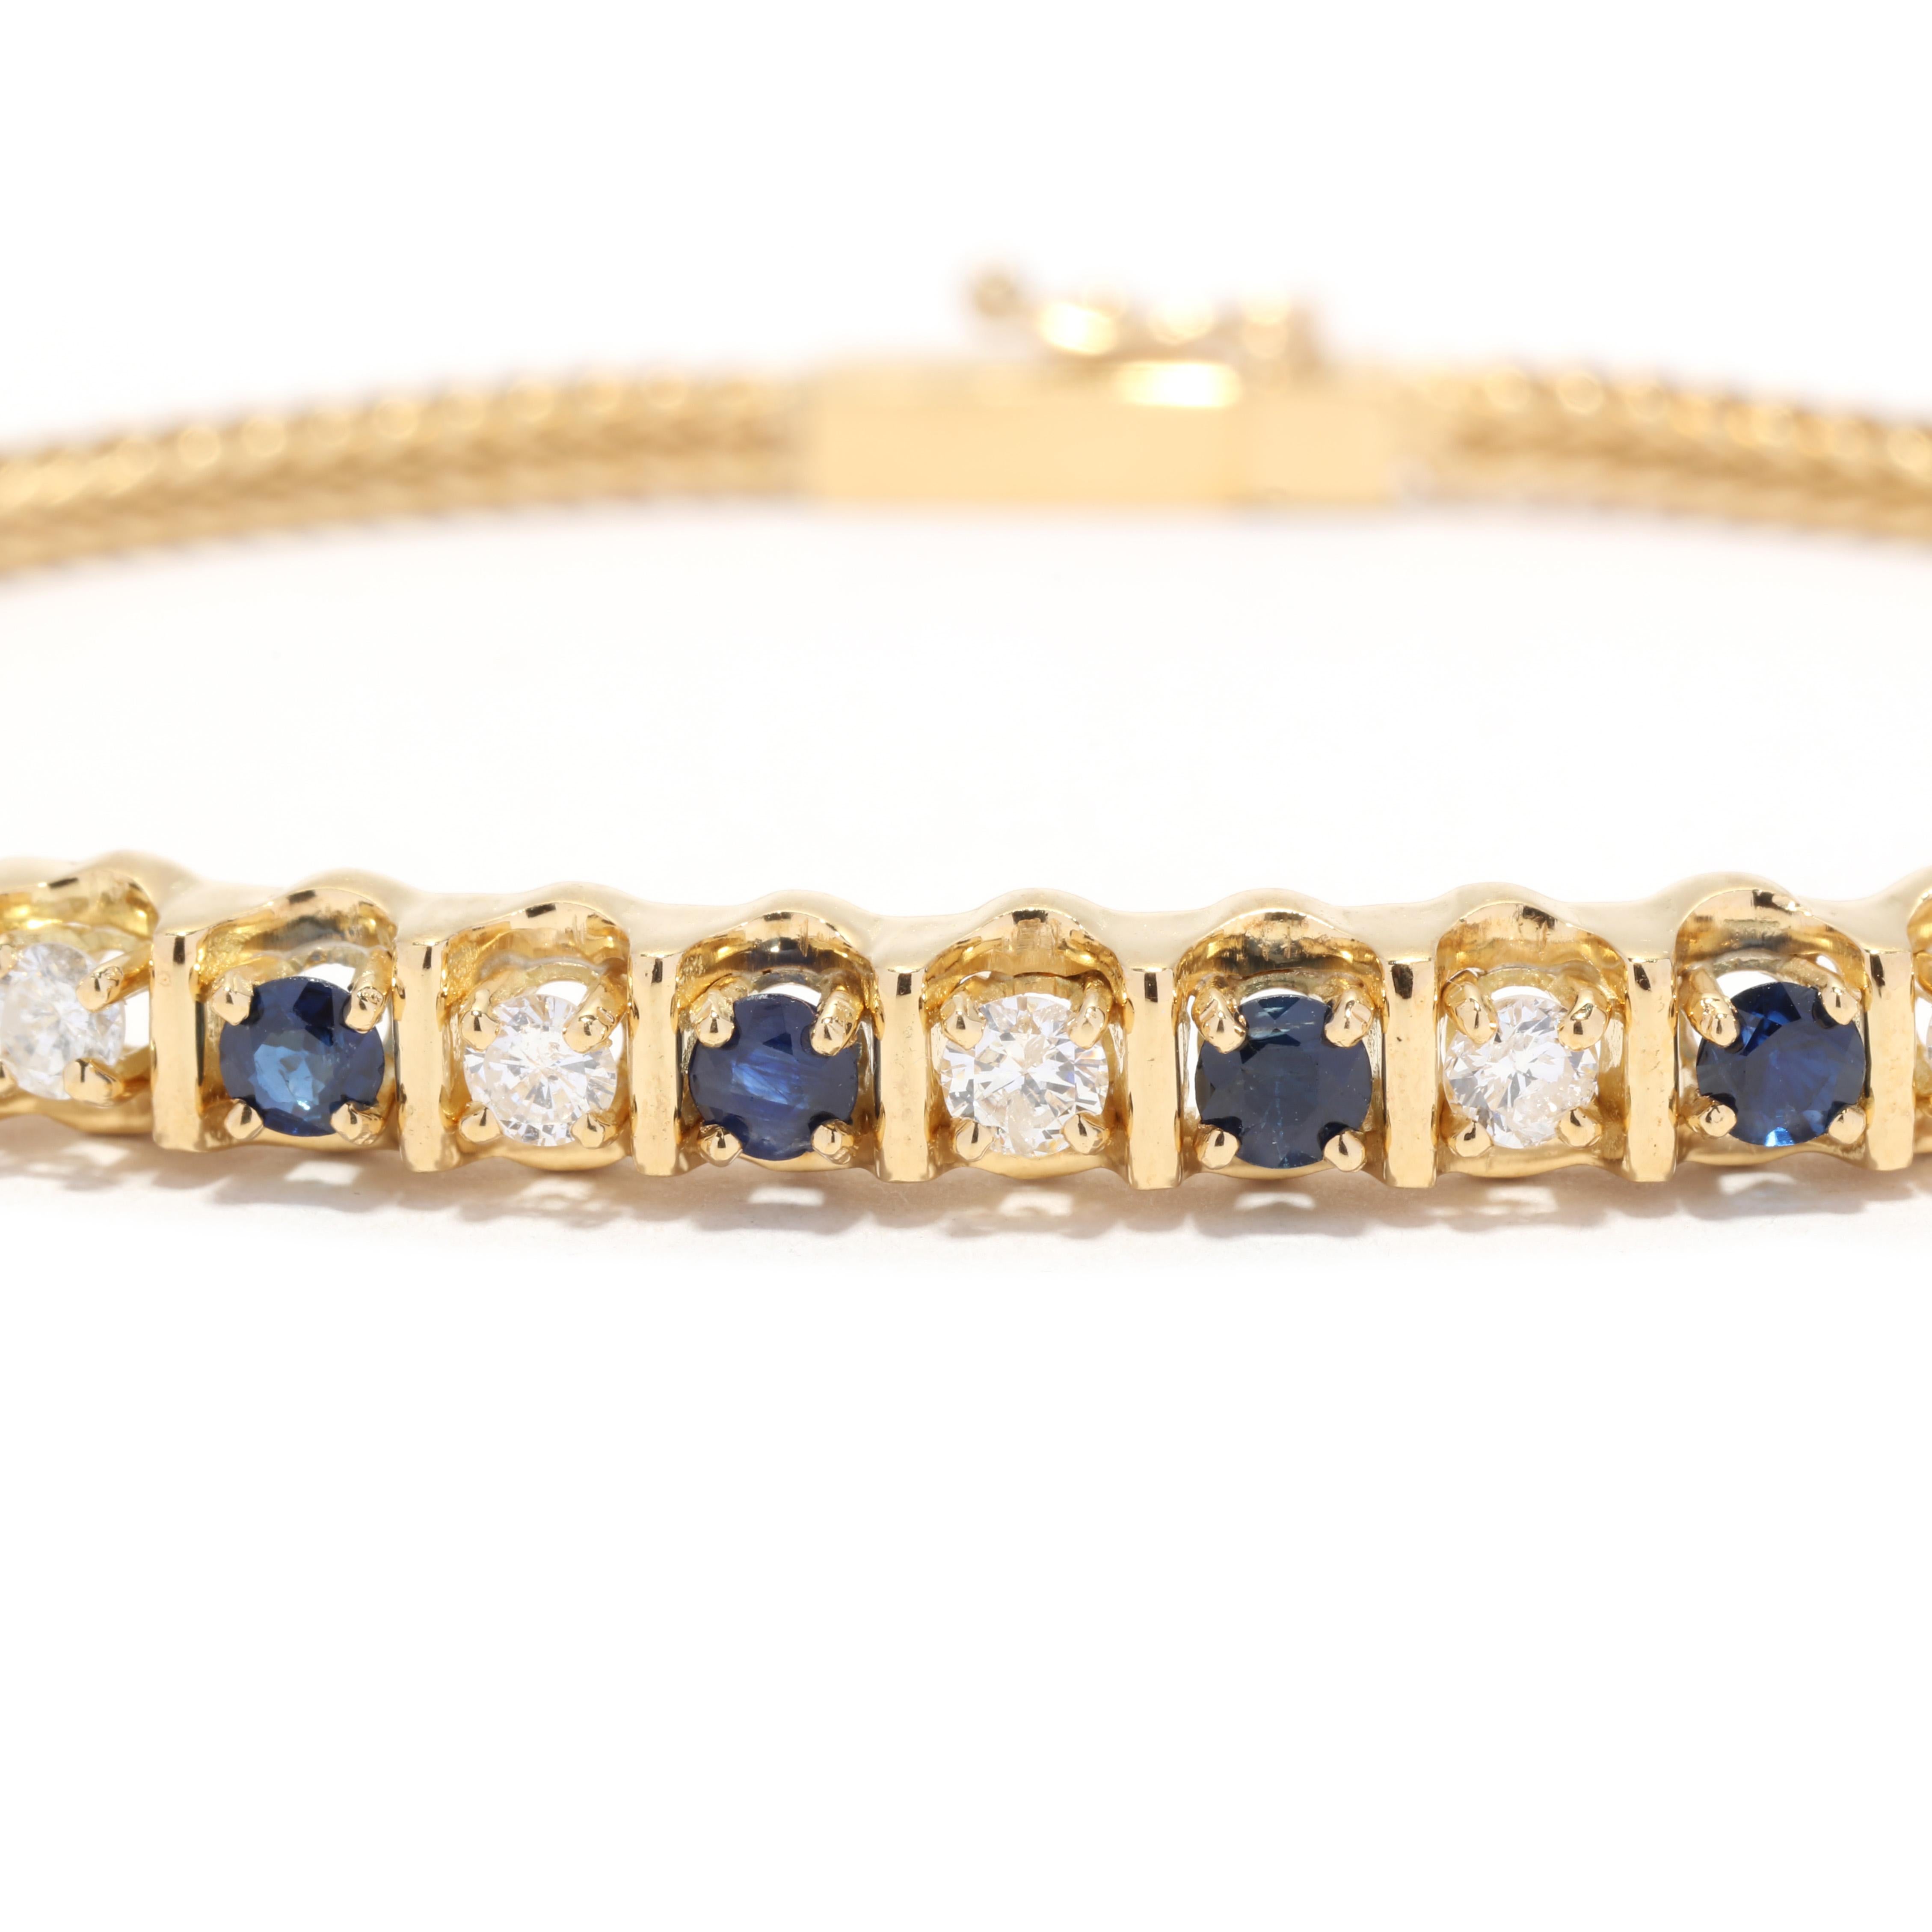 A vintage 18 karat yellow gold diamond and sapphire bar bracelet. This stackable bracelet  features a bar station set with alternating round cut sapphires weighing approximately .80 total carats and round brilliant cut diamonds weighing